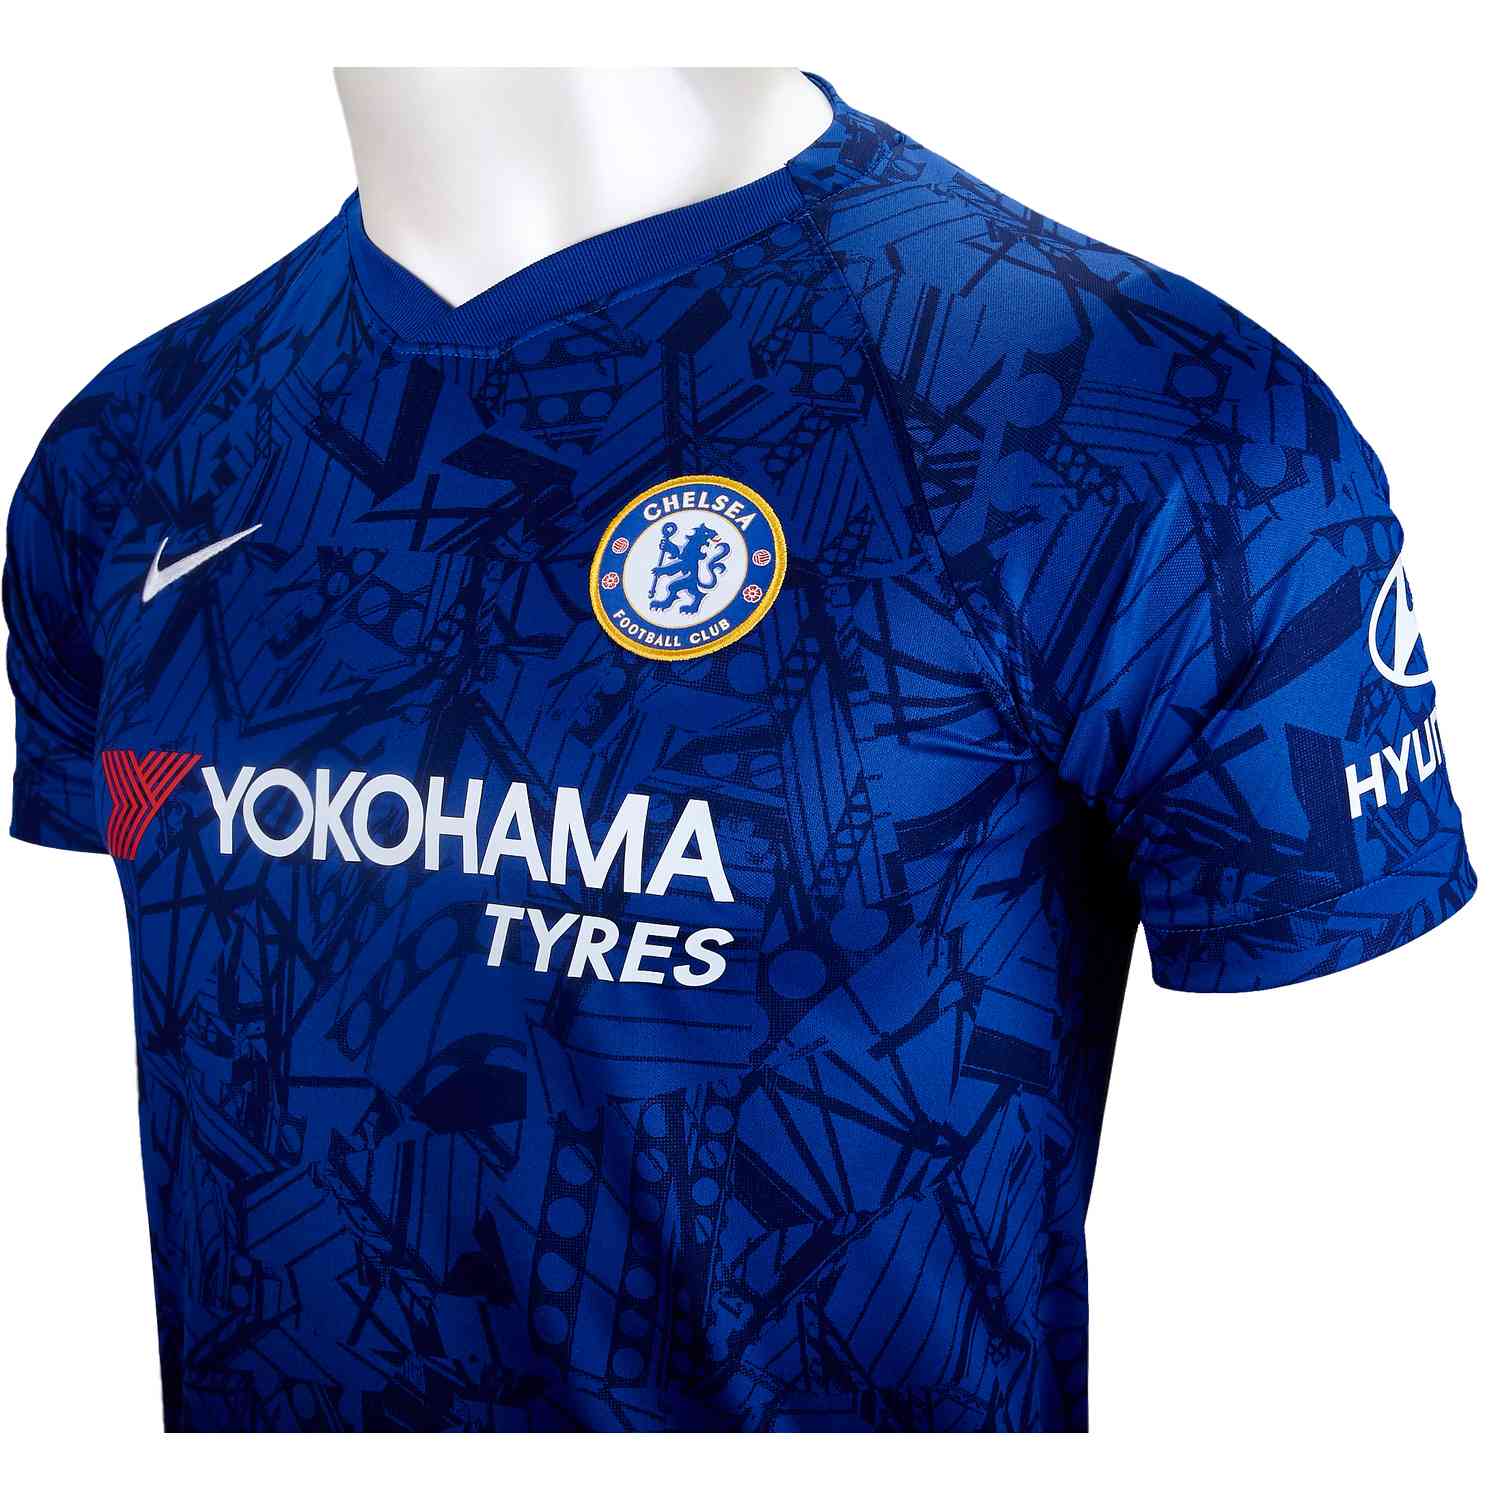 youth pulisic chelsea jersey